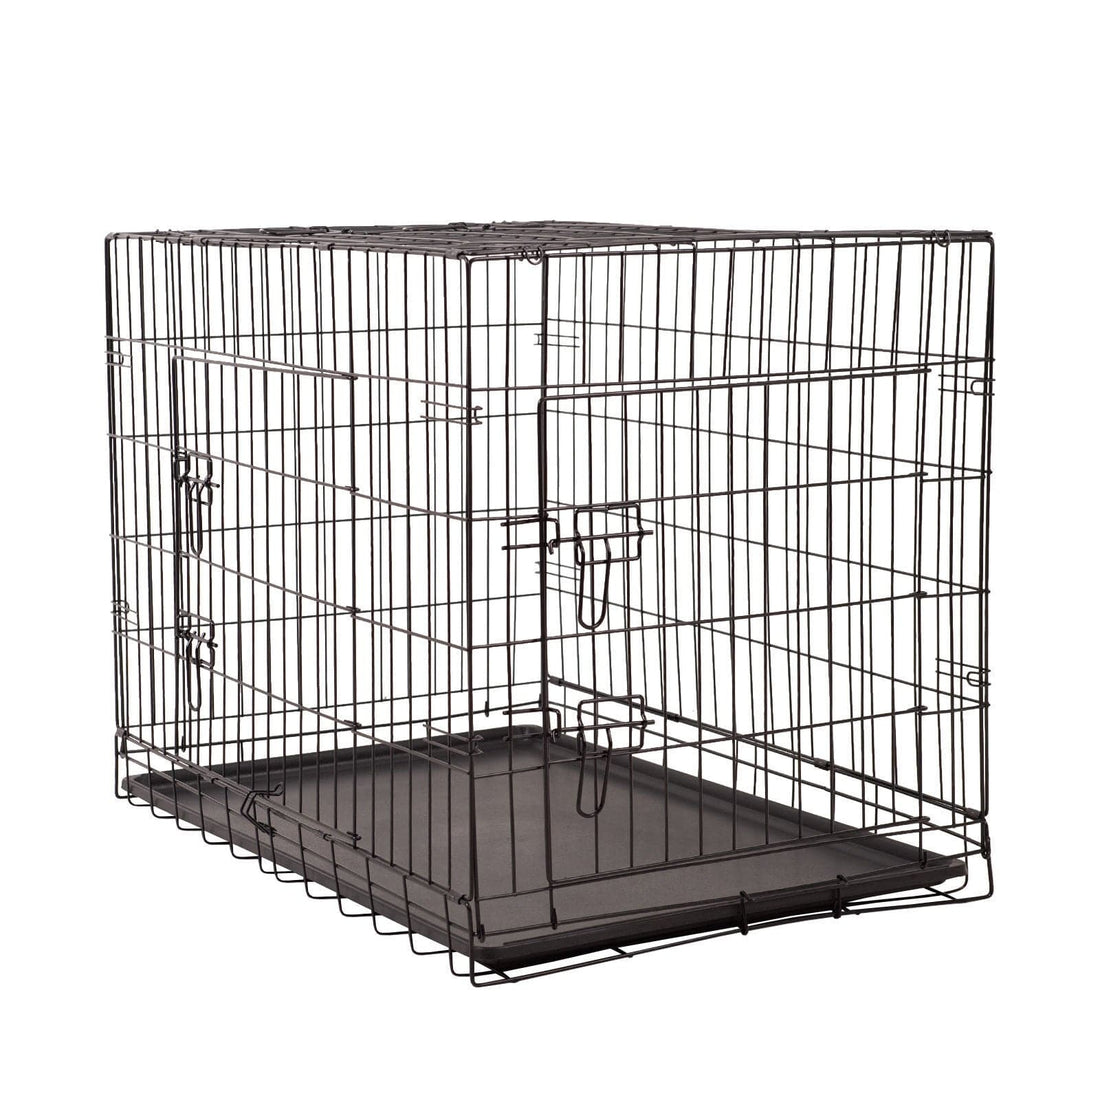 4Paws Dog Cage Pet Crate Cat Puppy Metal Cage ABS Tray Foldable Portable-Crates, Houses &amp; Pens-PEROZ Accessories